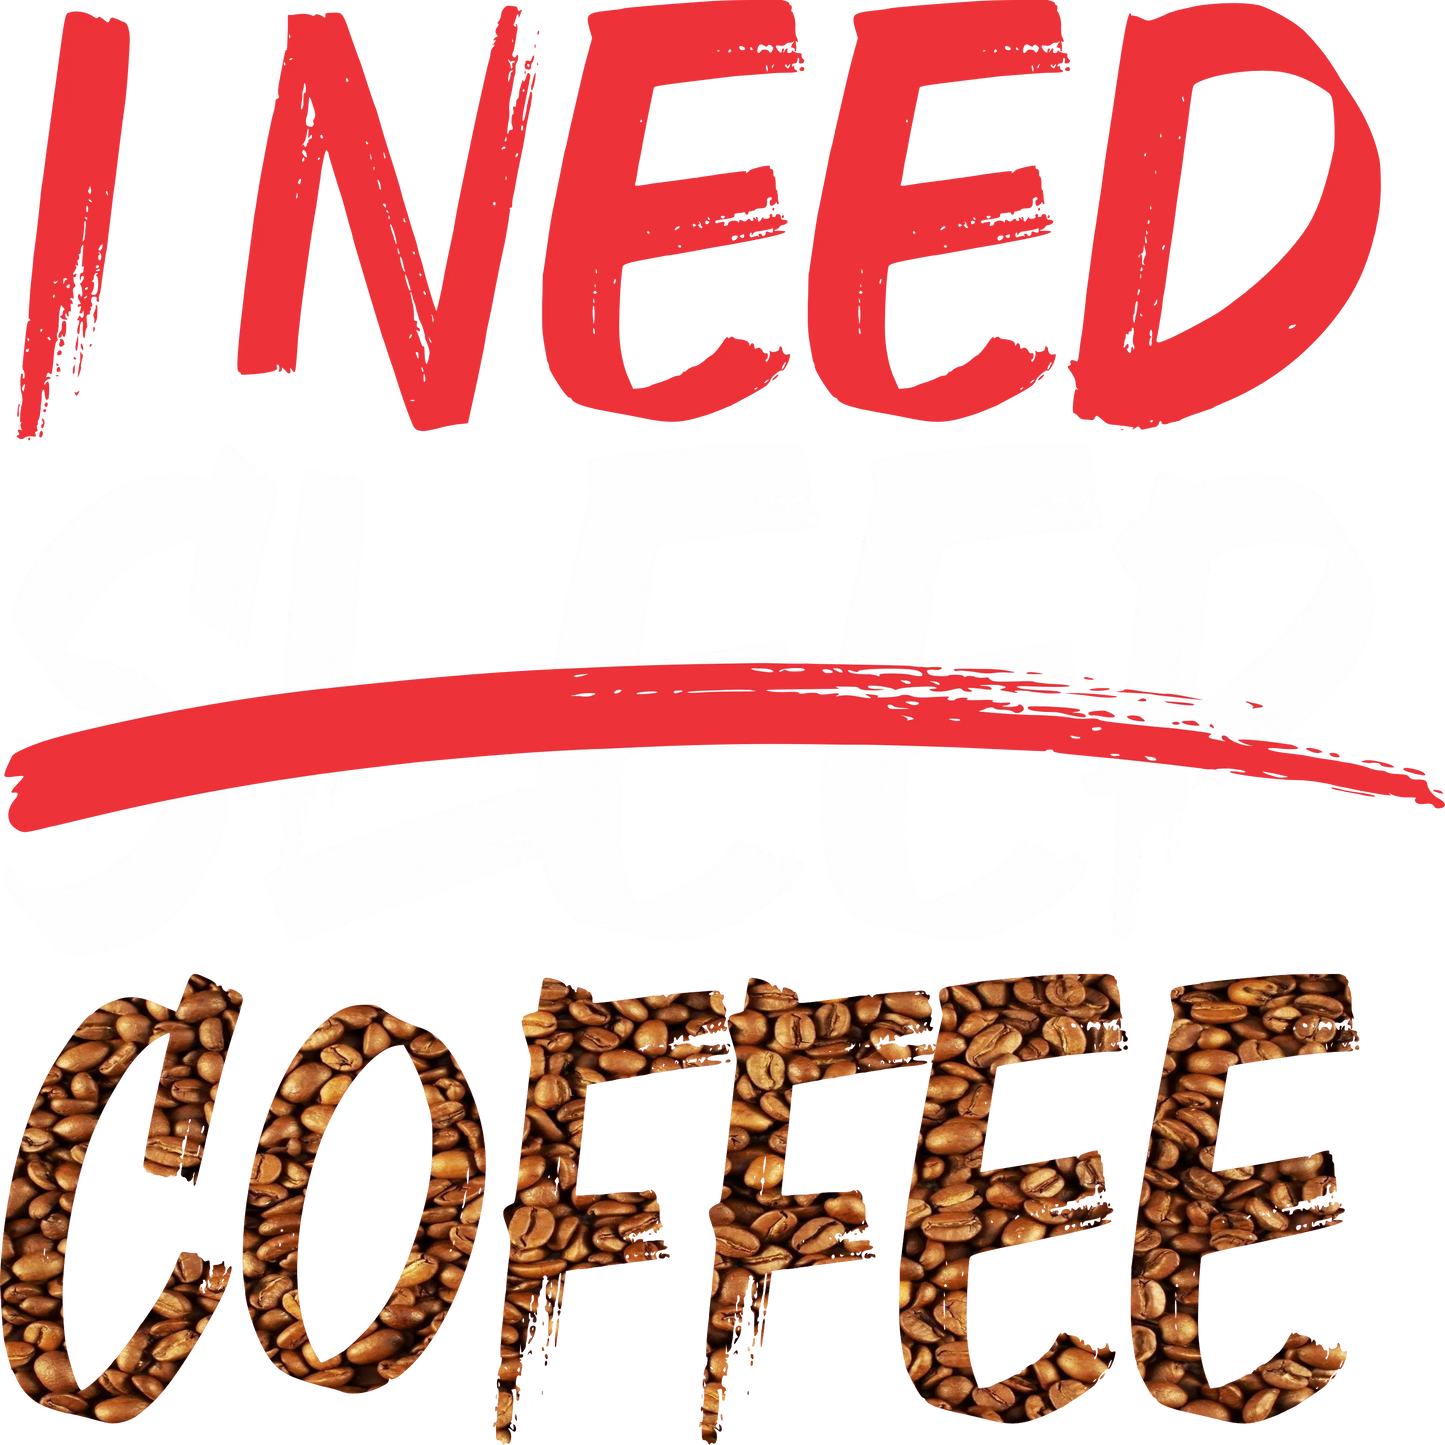 COF1 - I Need Coffee, DTF Transfer, Apparel & Accessories, Ace DTF